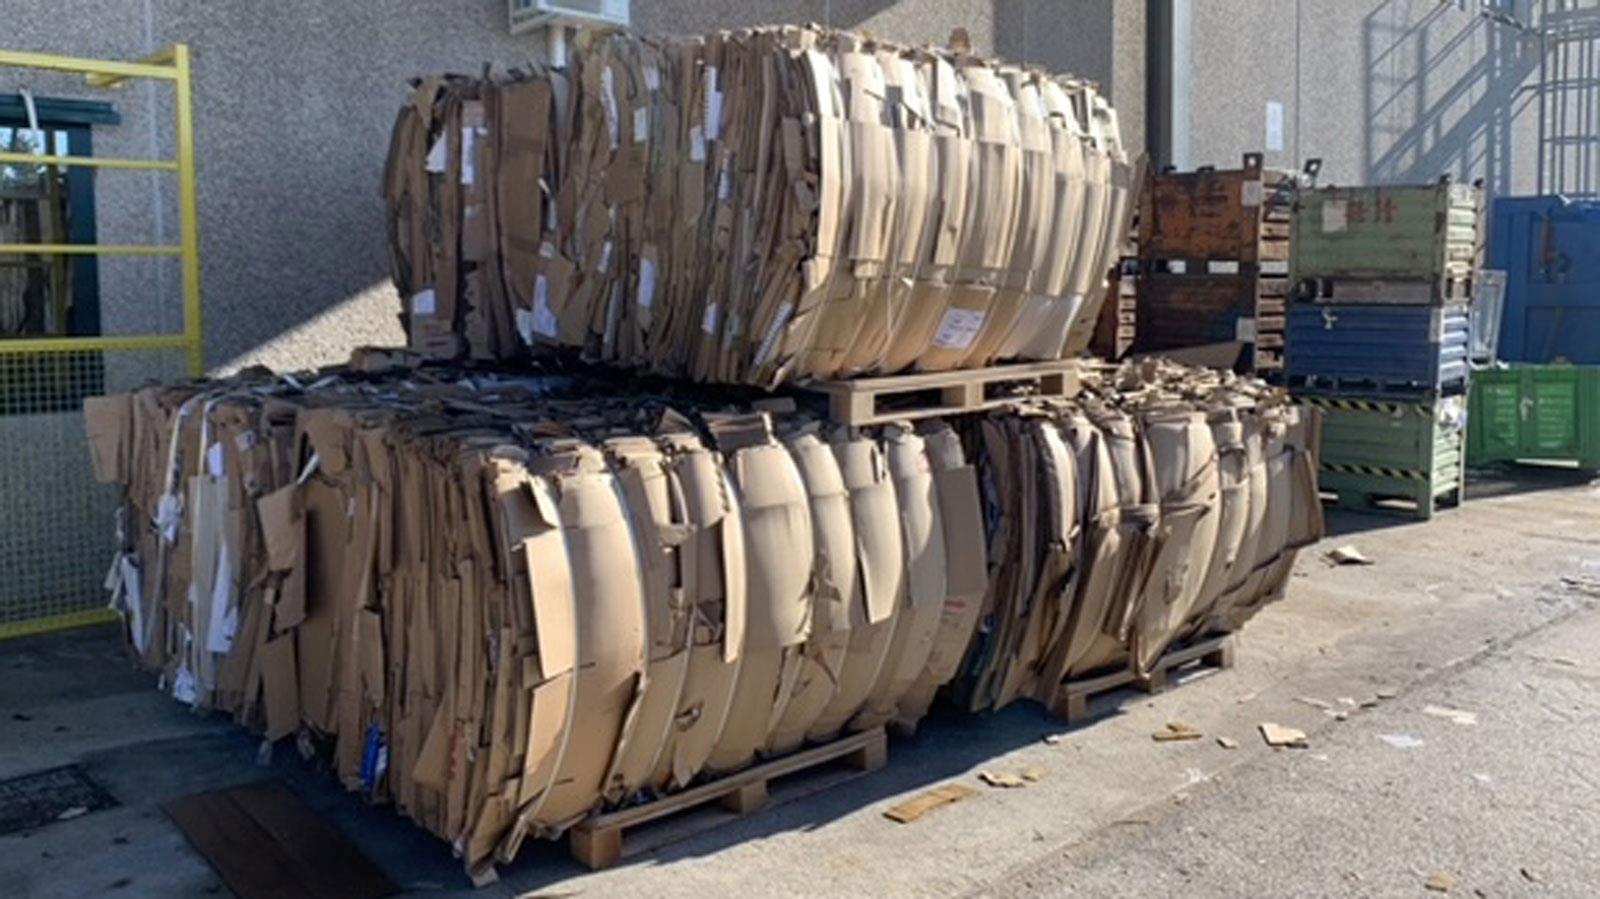 Cardboardbales stacked on each other outside